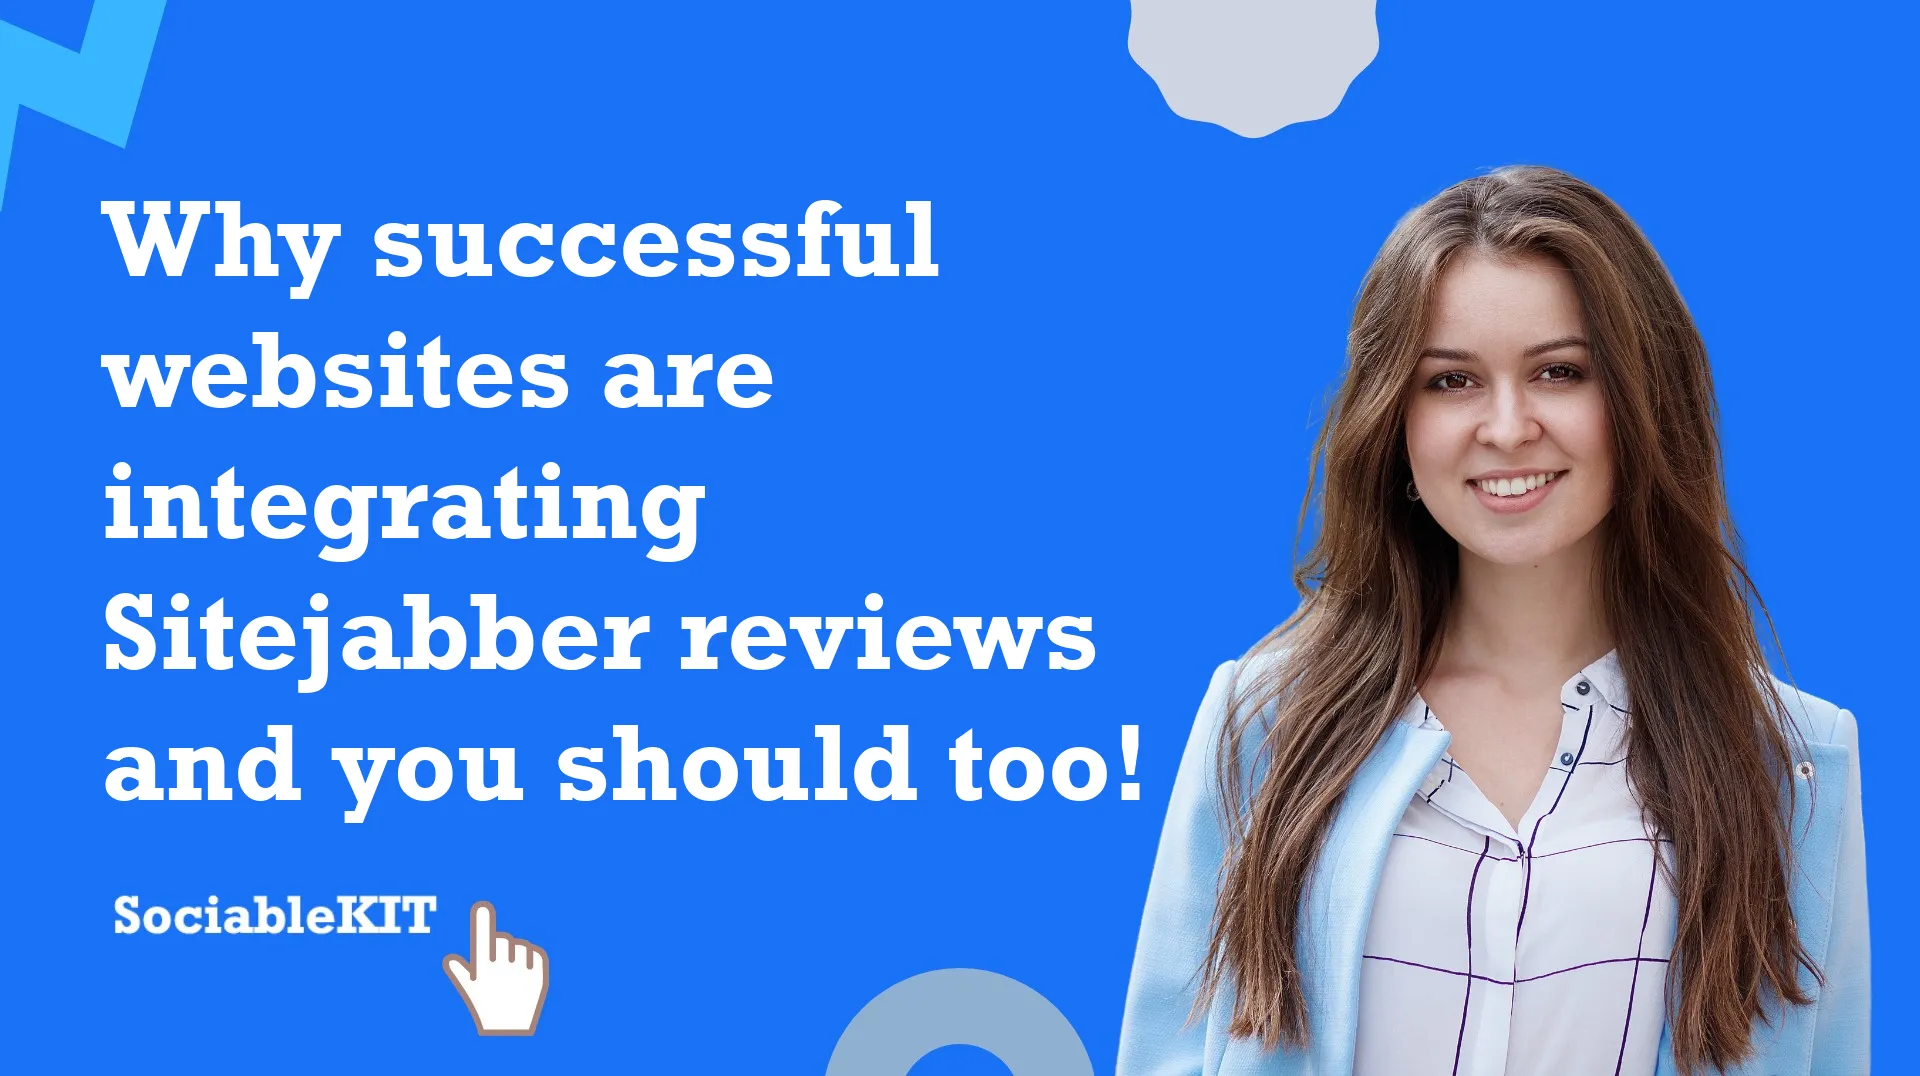 Why successful websites are integrating Sitejabber reviews and you should too!